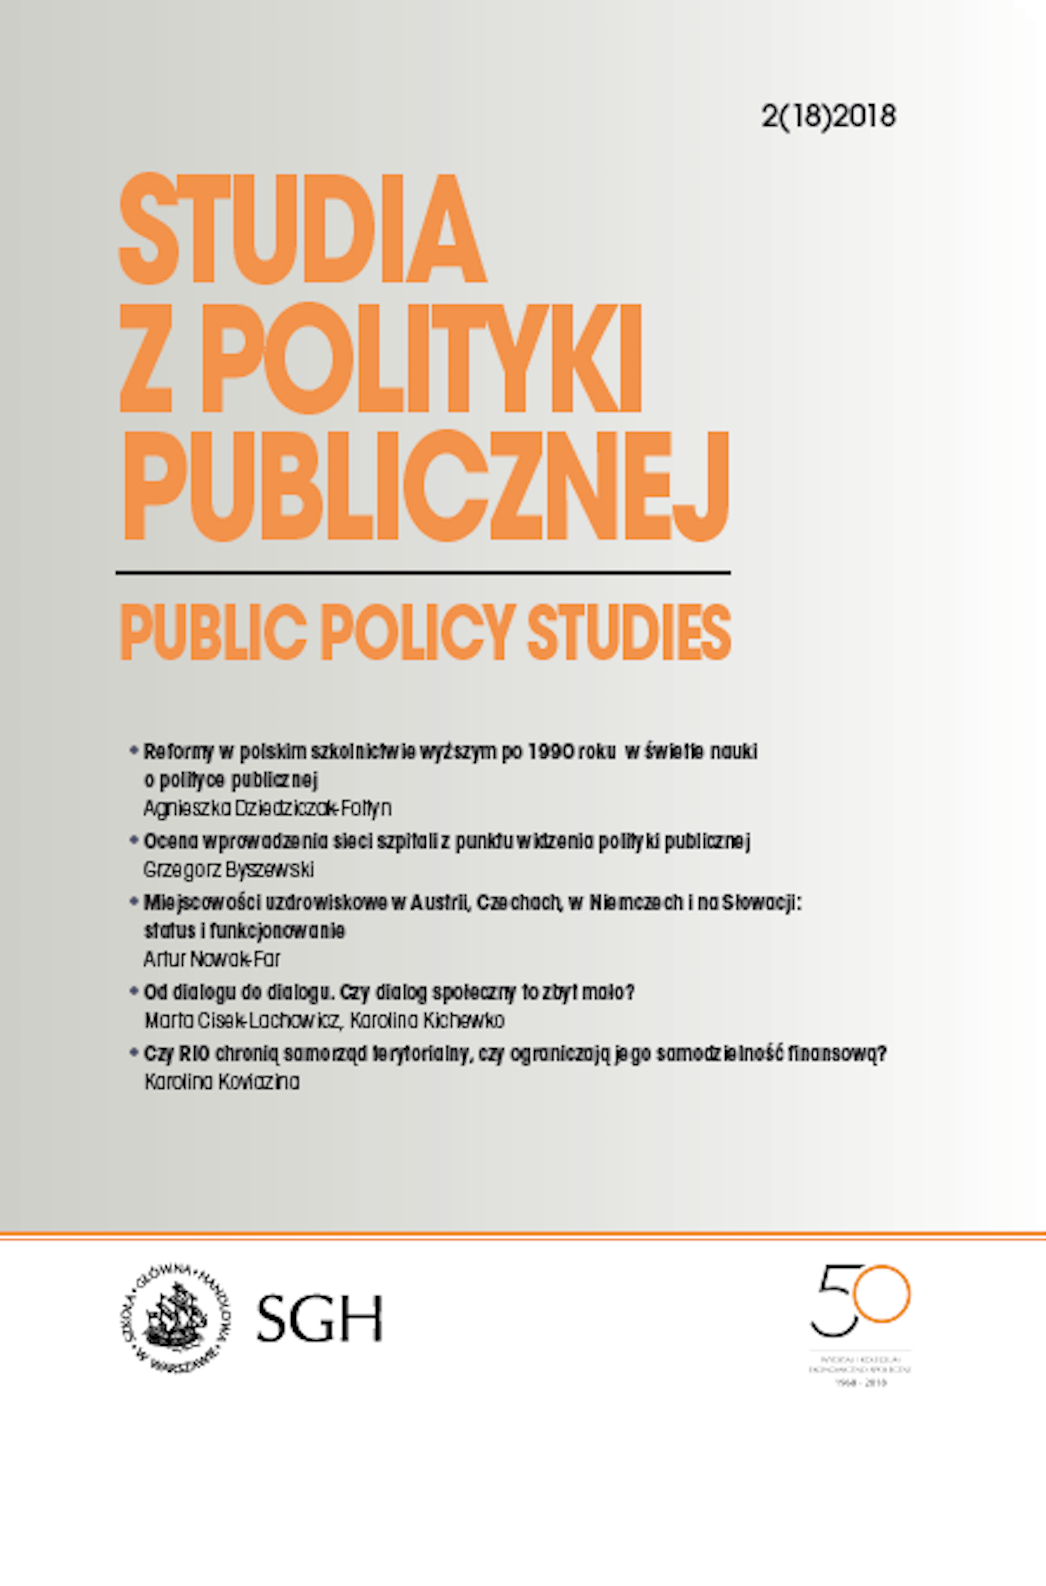 Public policymaking and its analysis at National and European levels